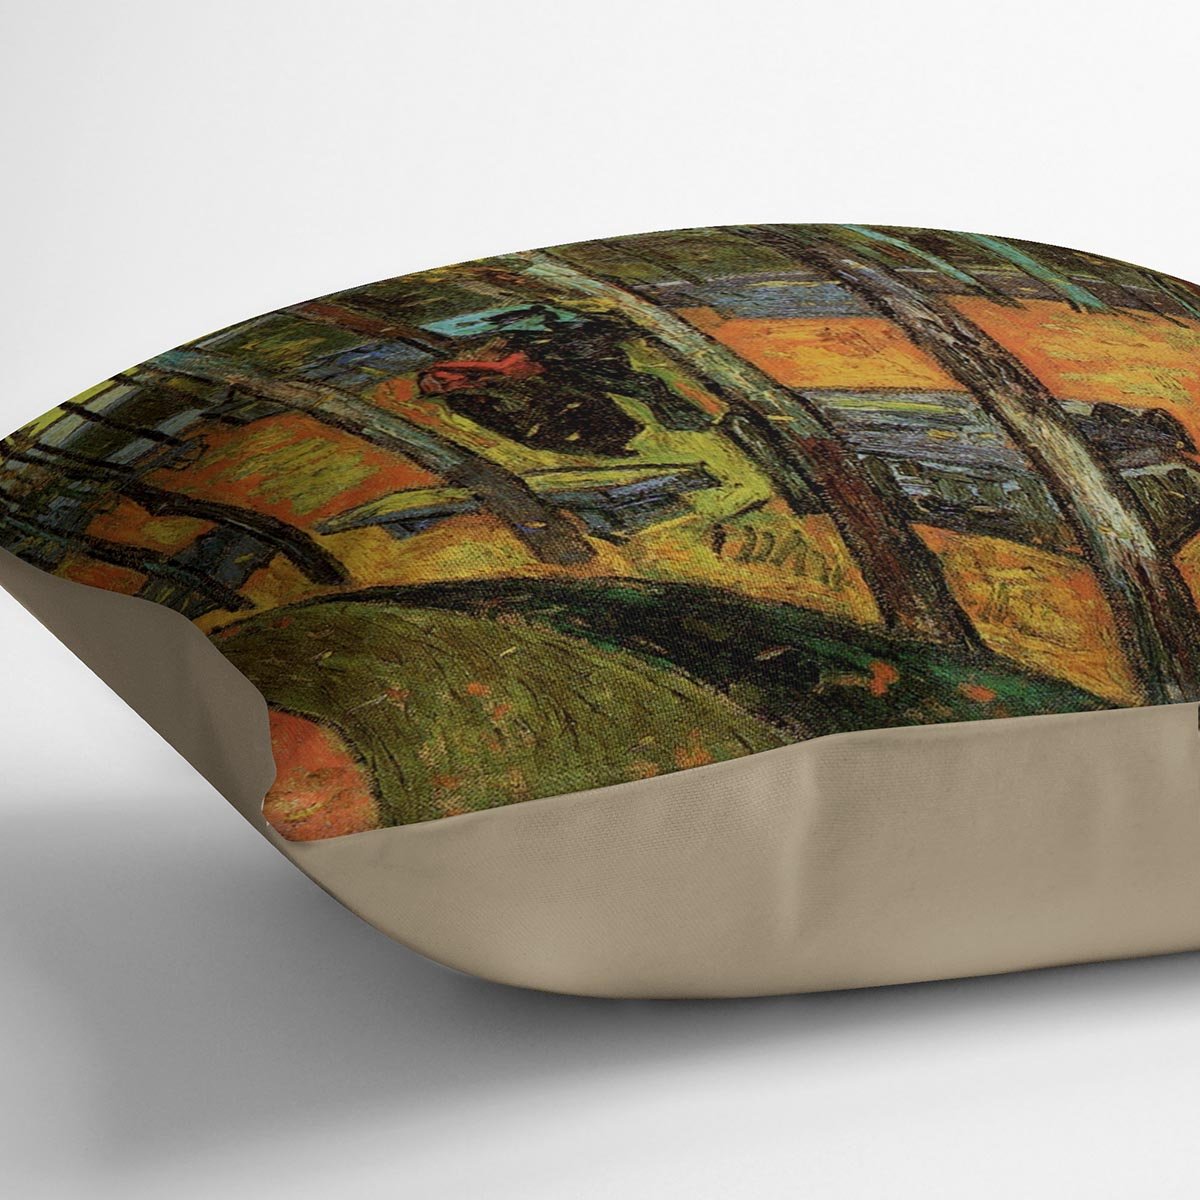 Les Alyscamps 2 by Van Gogh Throw Pillow